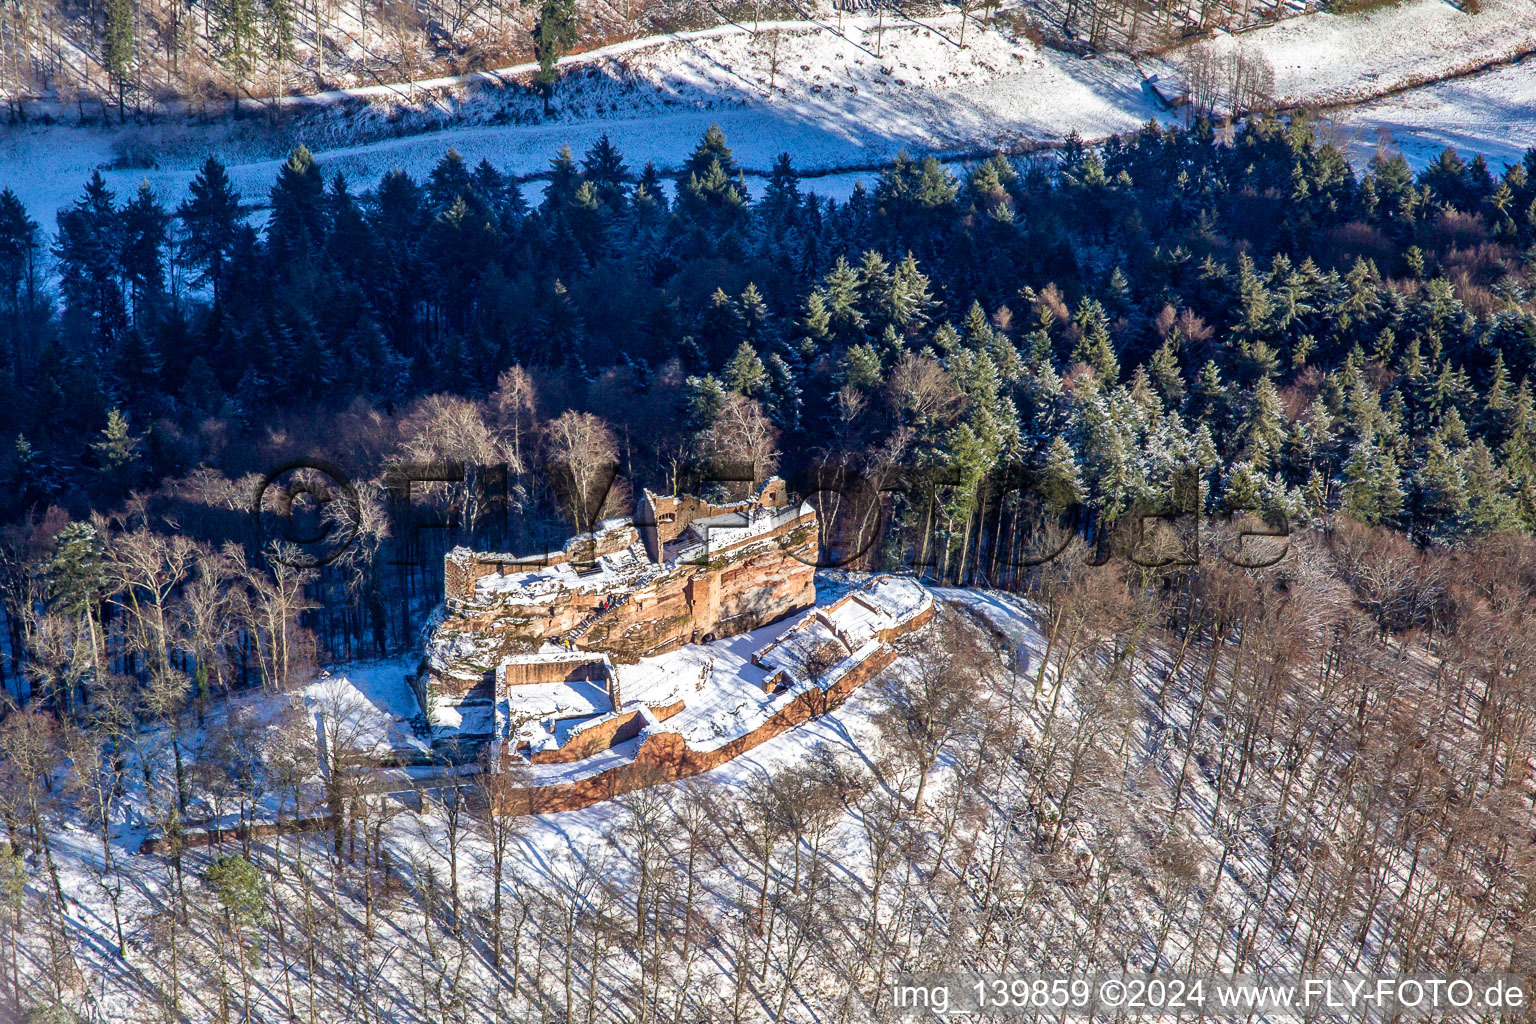 Meisteresel Castle from the south in winter with snow in Ramberg in the state Rhineland-Palatinate, Germany